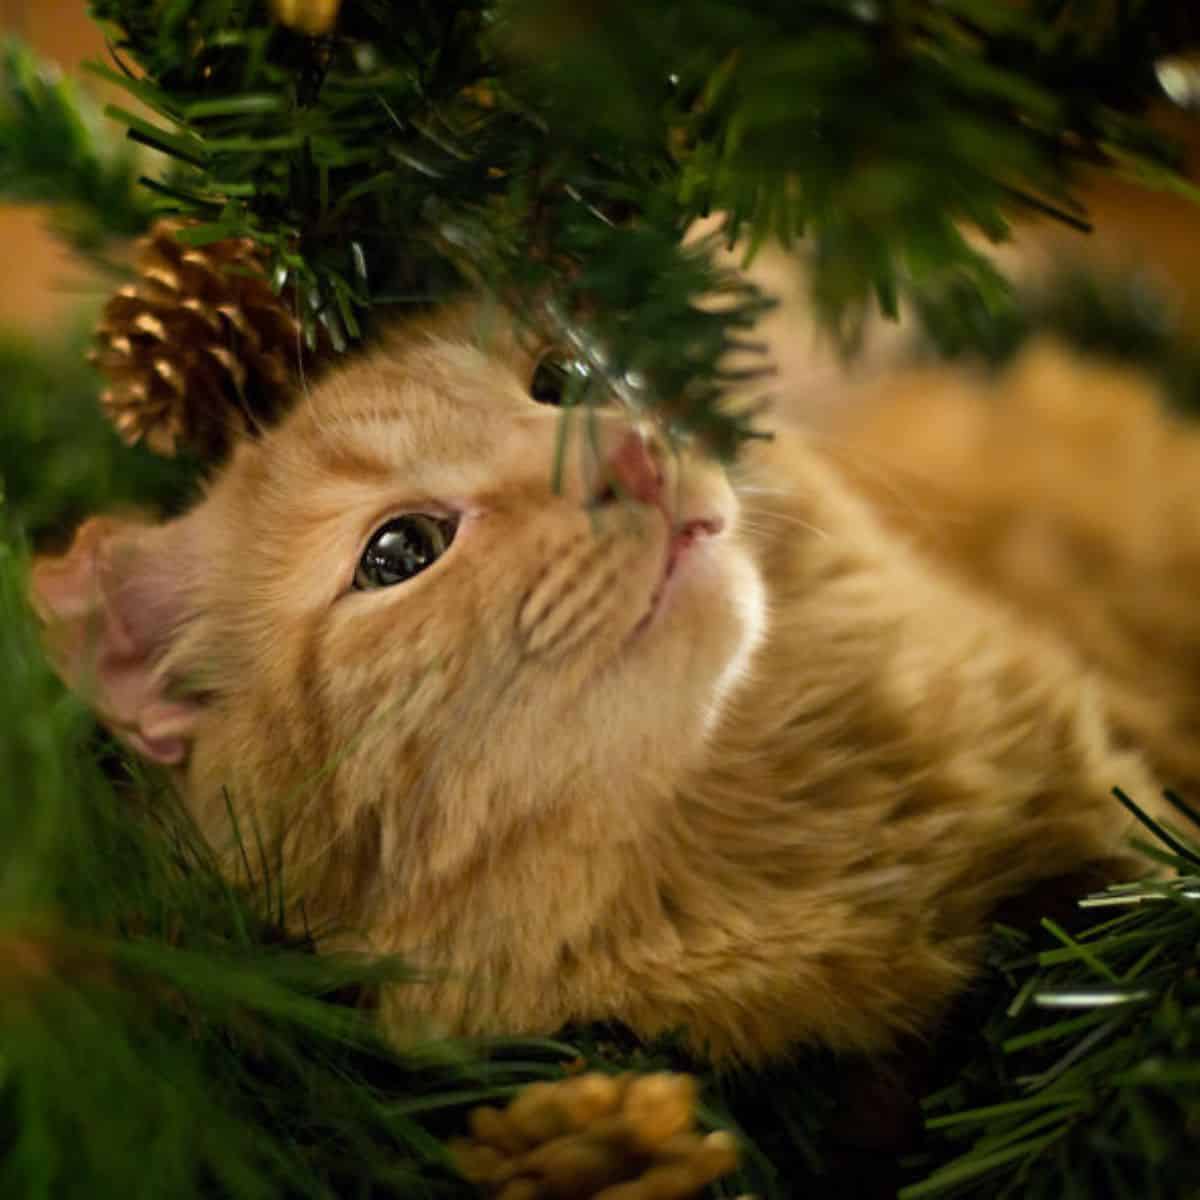 the yellow cat sniffs the Christmas tree